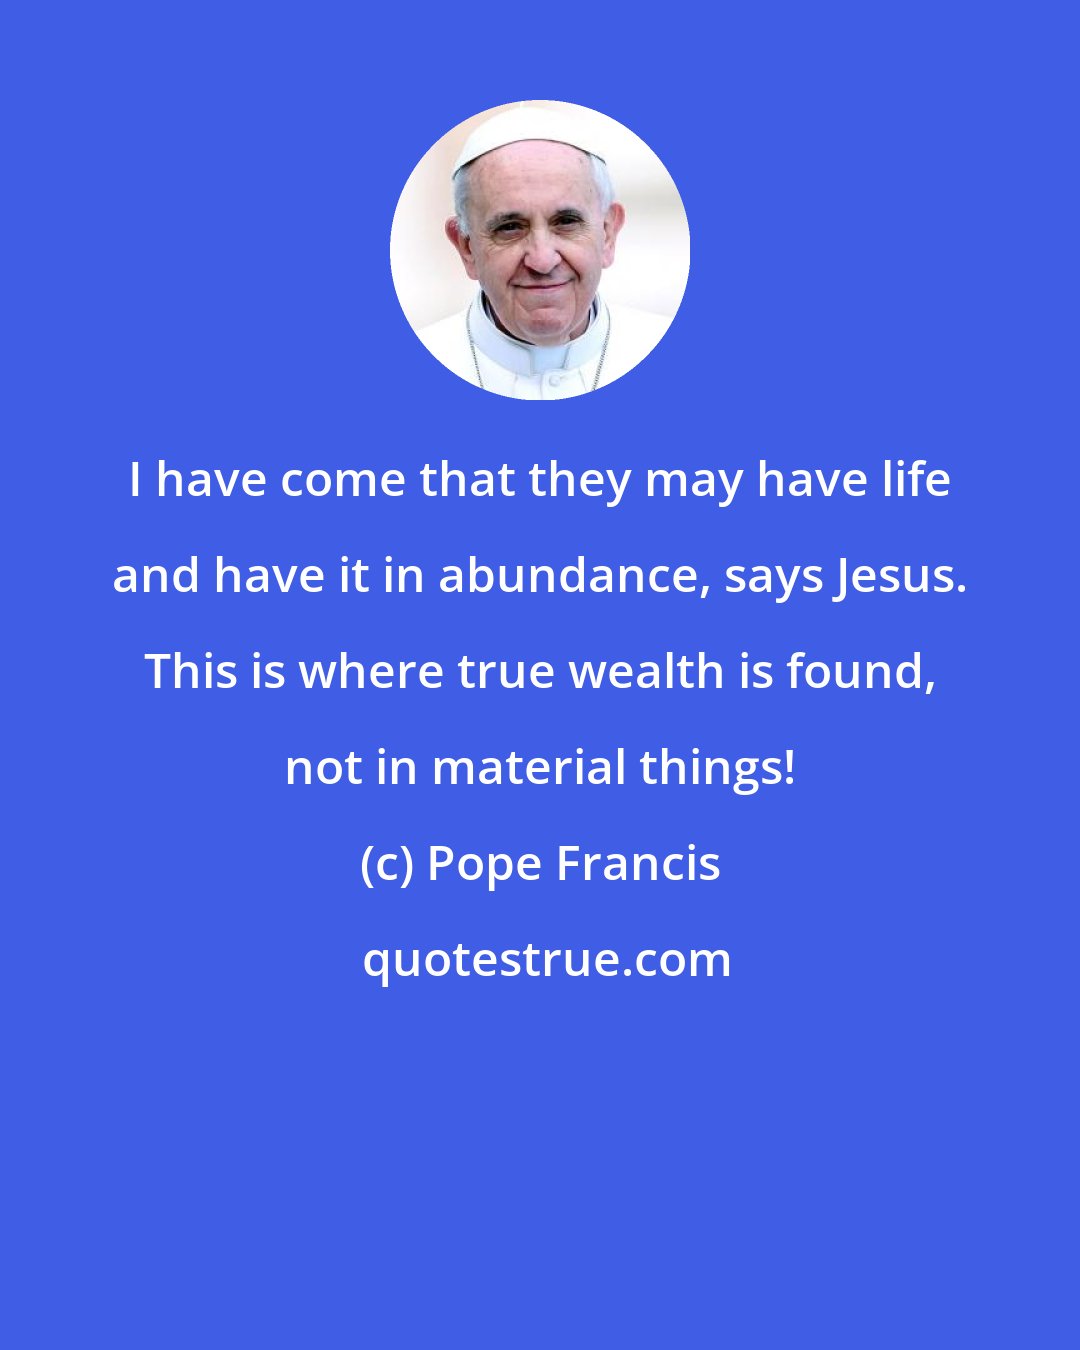 Pope Francis: I have come that they may have life and have it in abundance, says Jesus. This is where true wealth is found, not in material things!